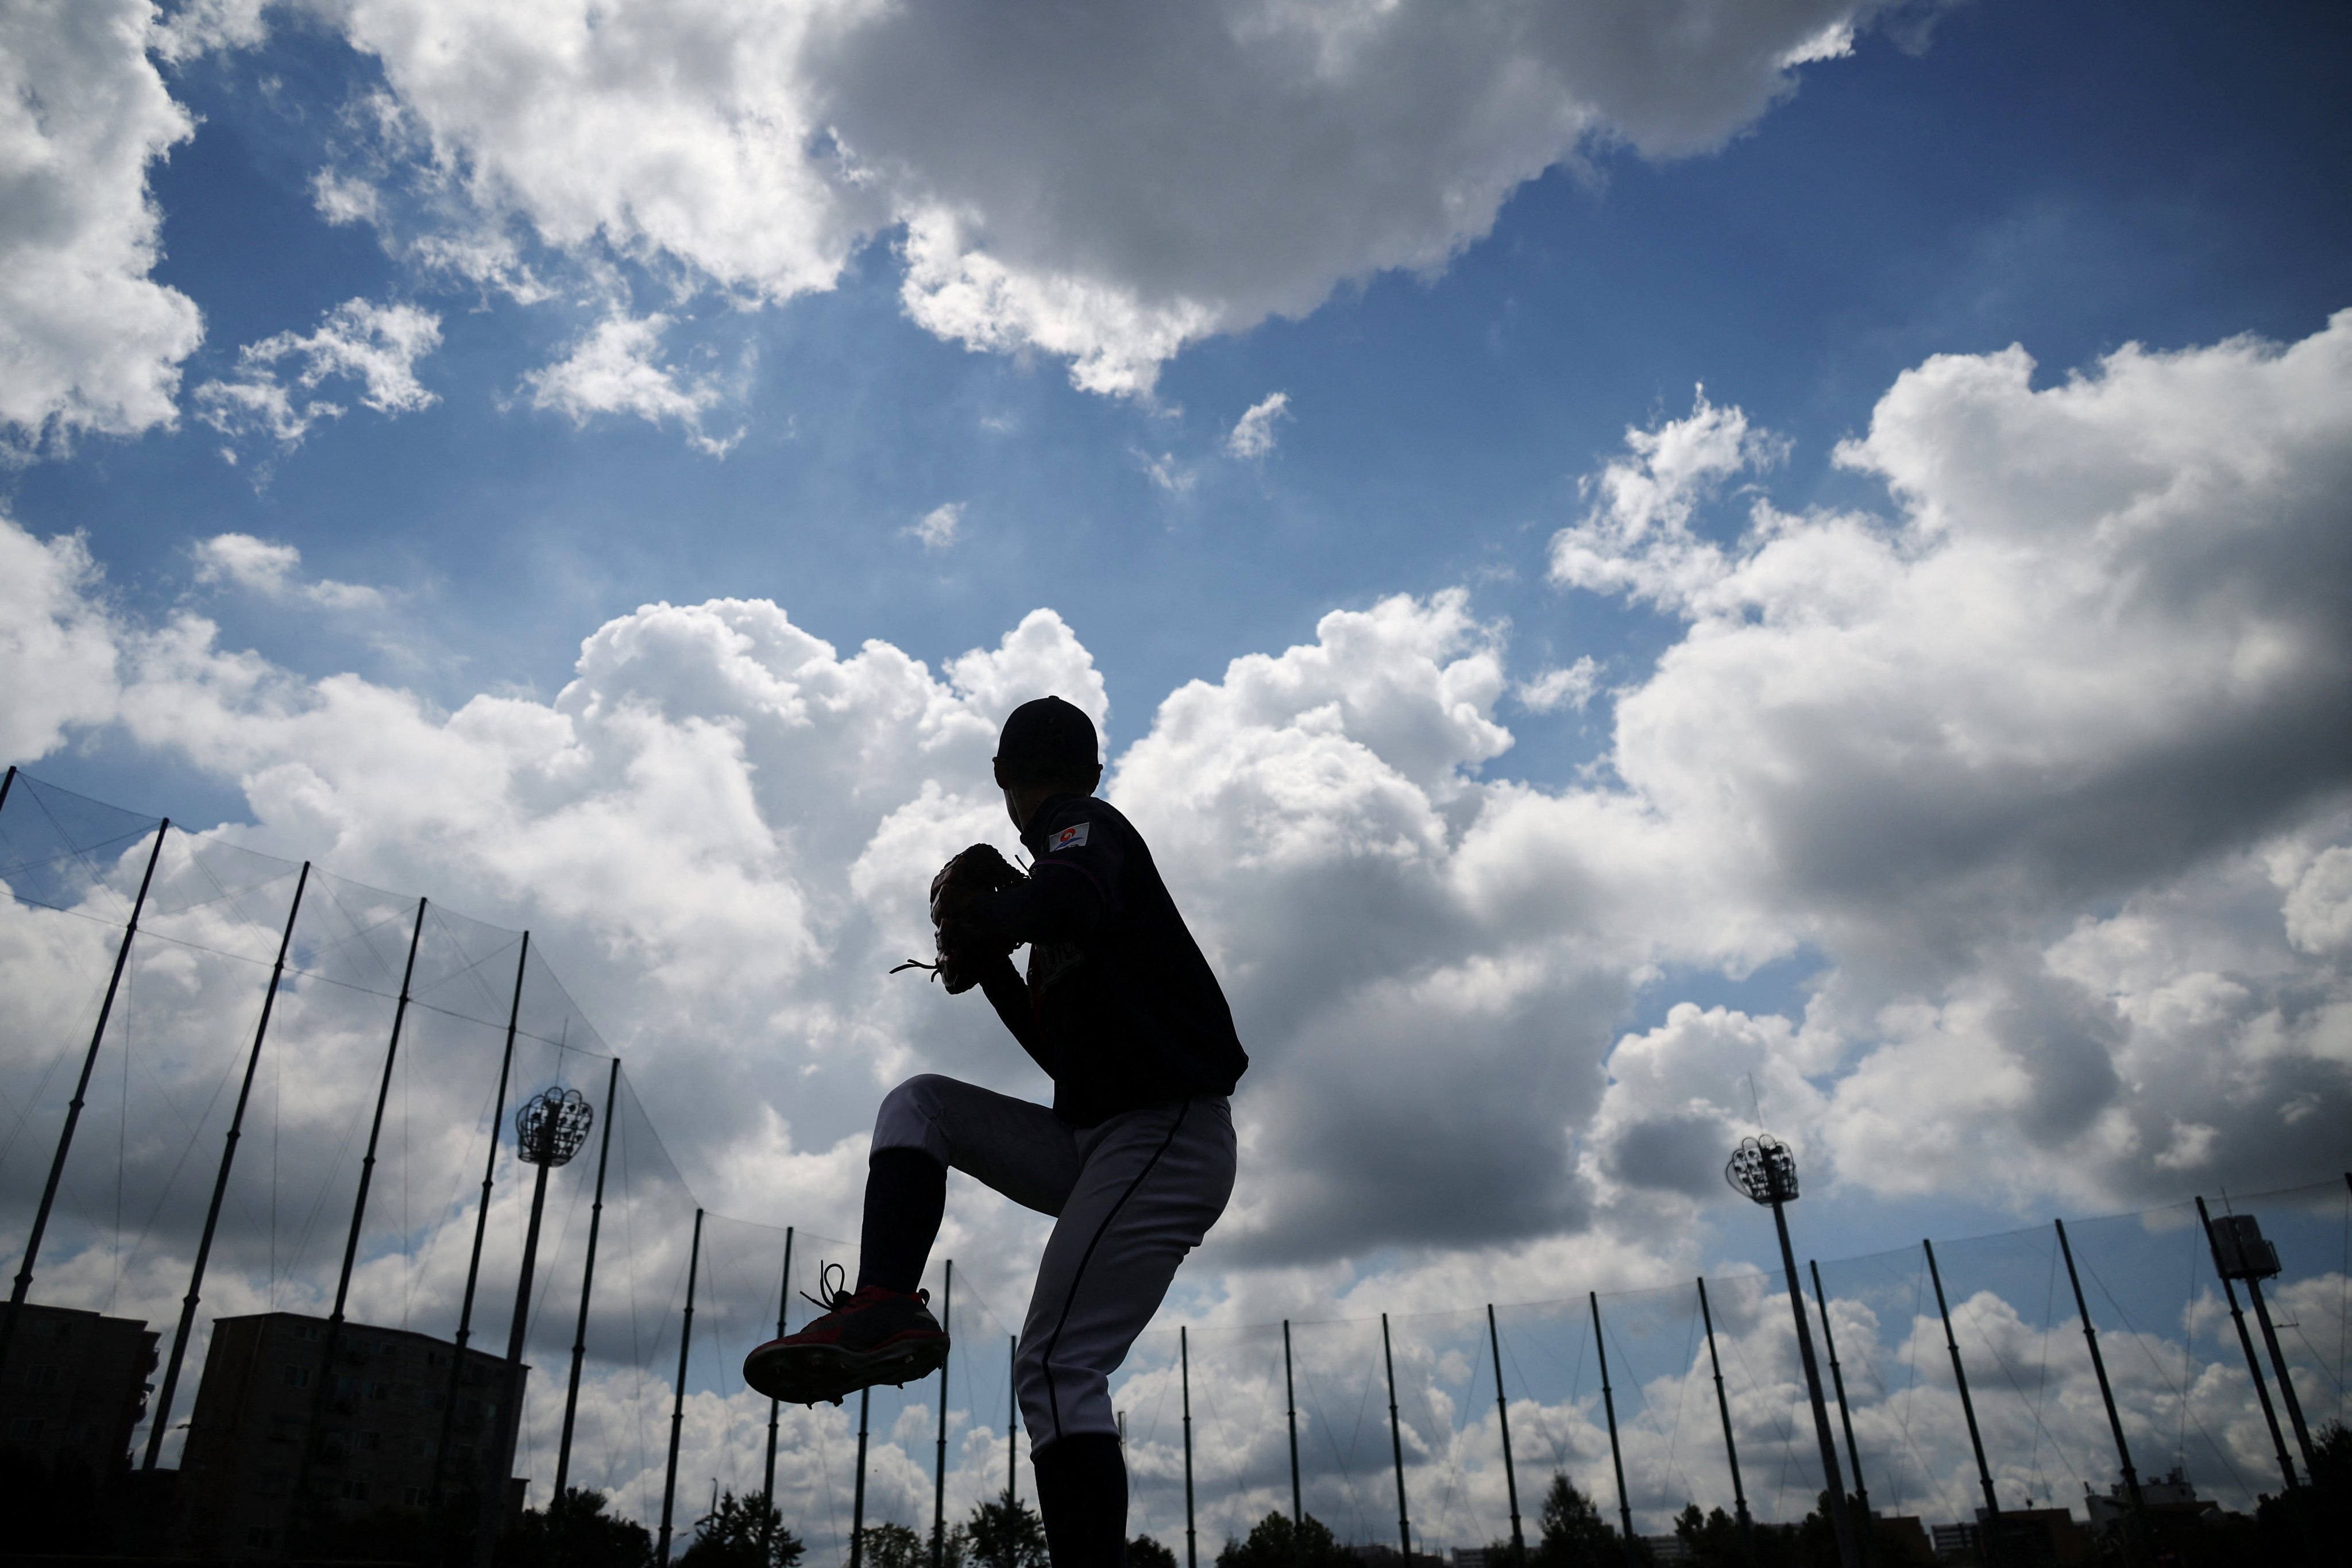 A member of the Deokjeok High School baseball team, warms up before a game. The university team has breathed life into Deokjeok, which was struggling to retain, and attract, youngsters, like many other rural areas in the world’s most rapidly ageing society. Photo: Reuters